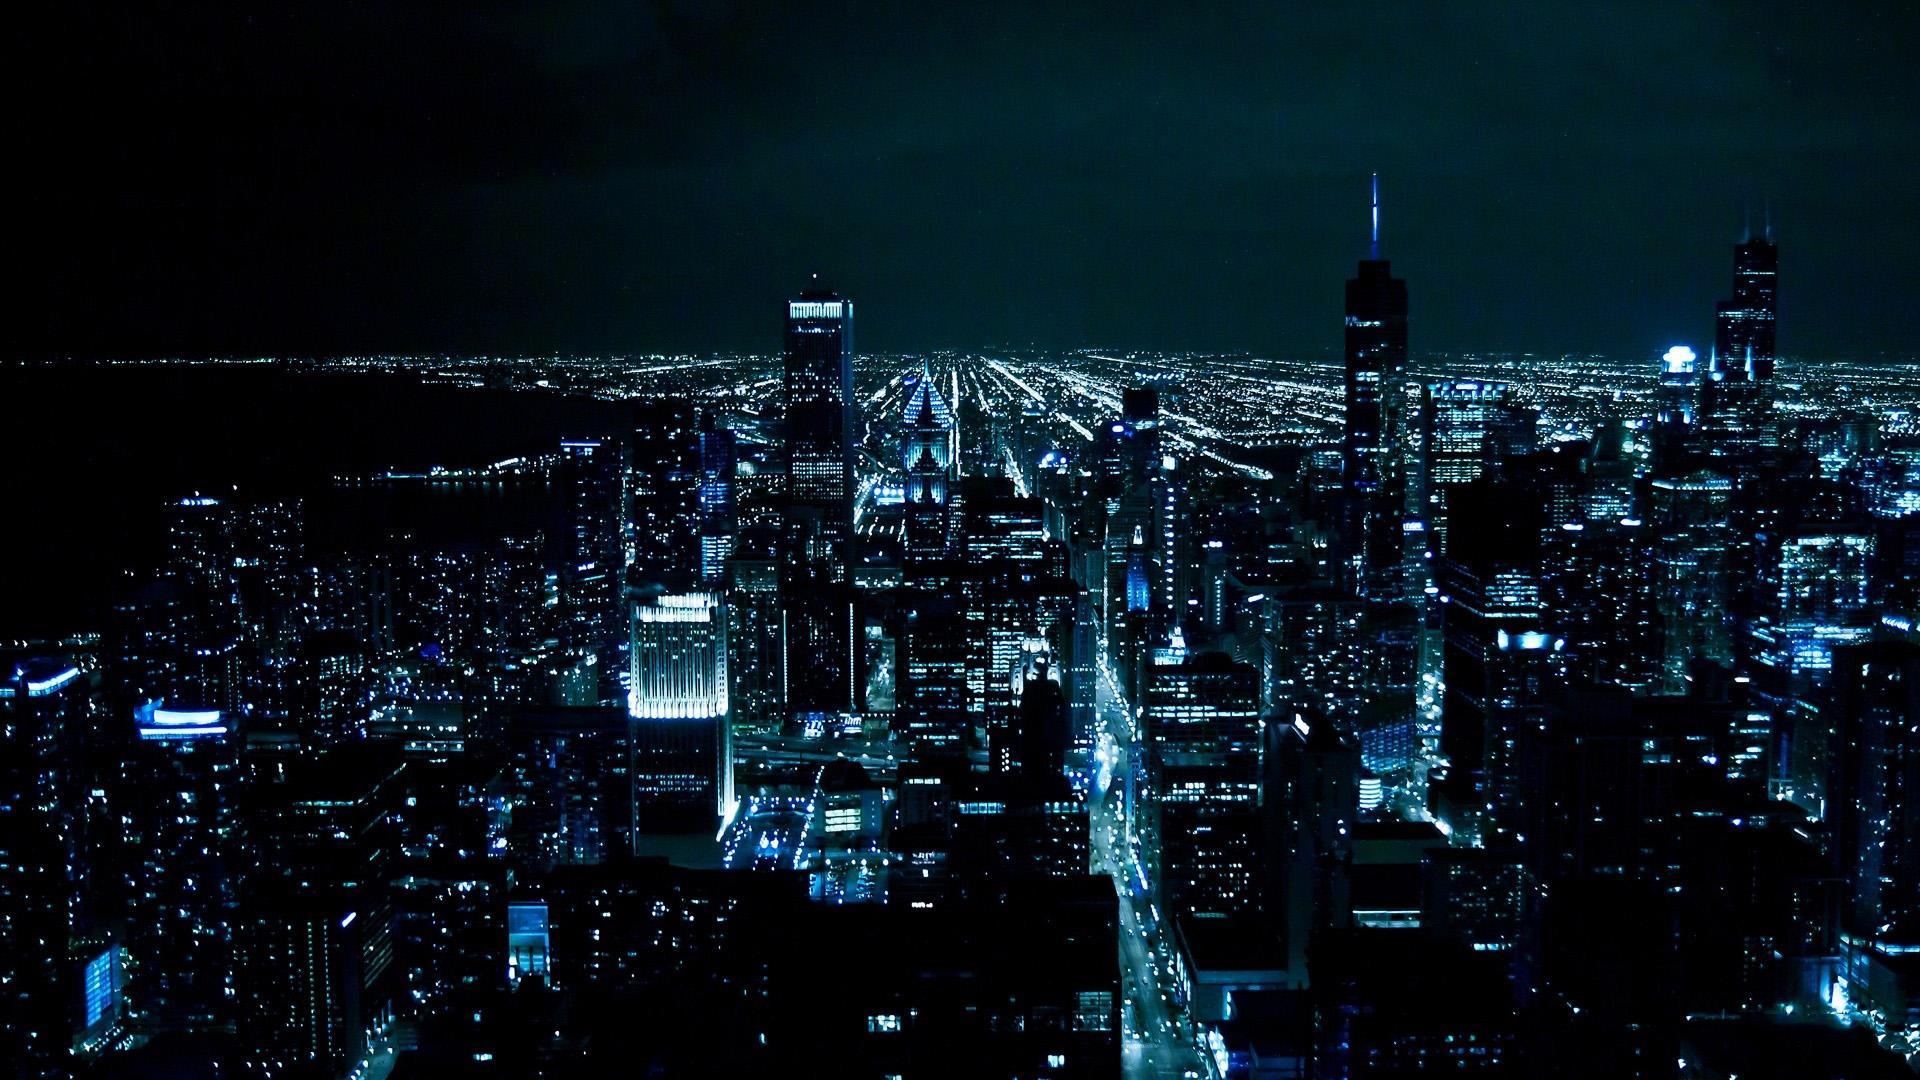 Dark City Live Wallpaper for Android - APK Download